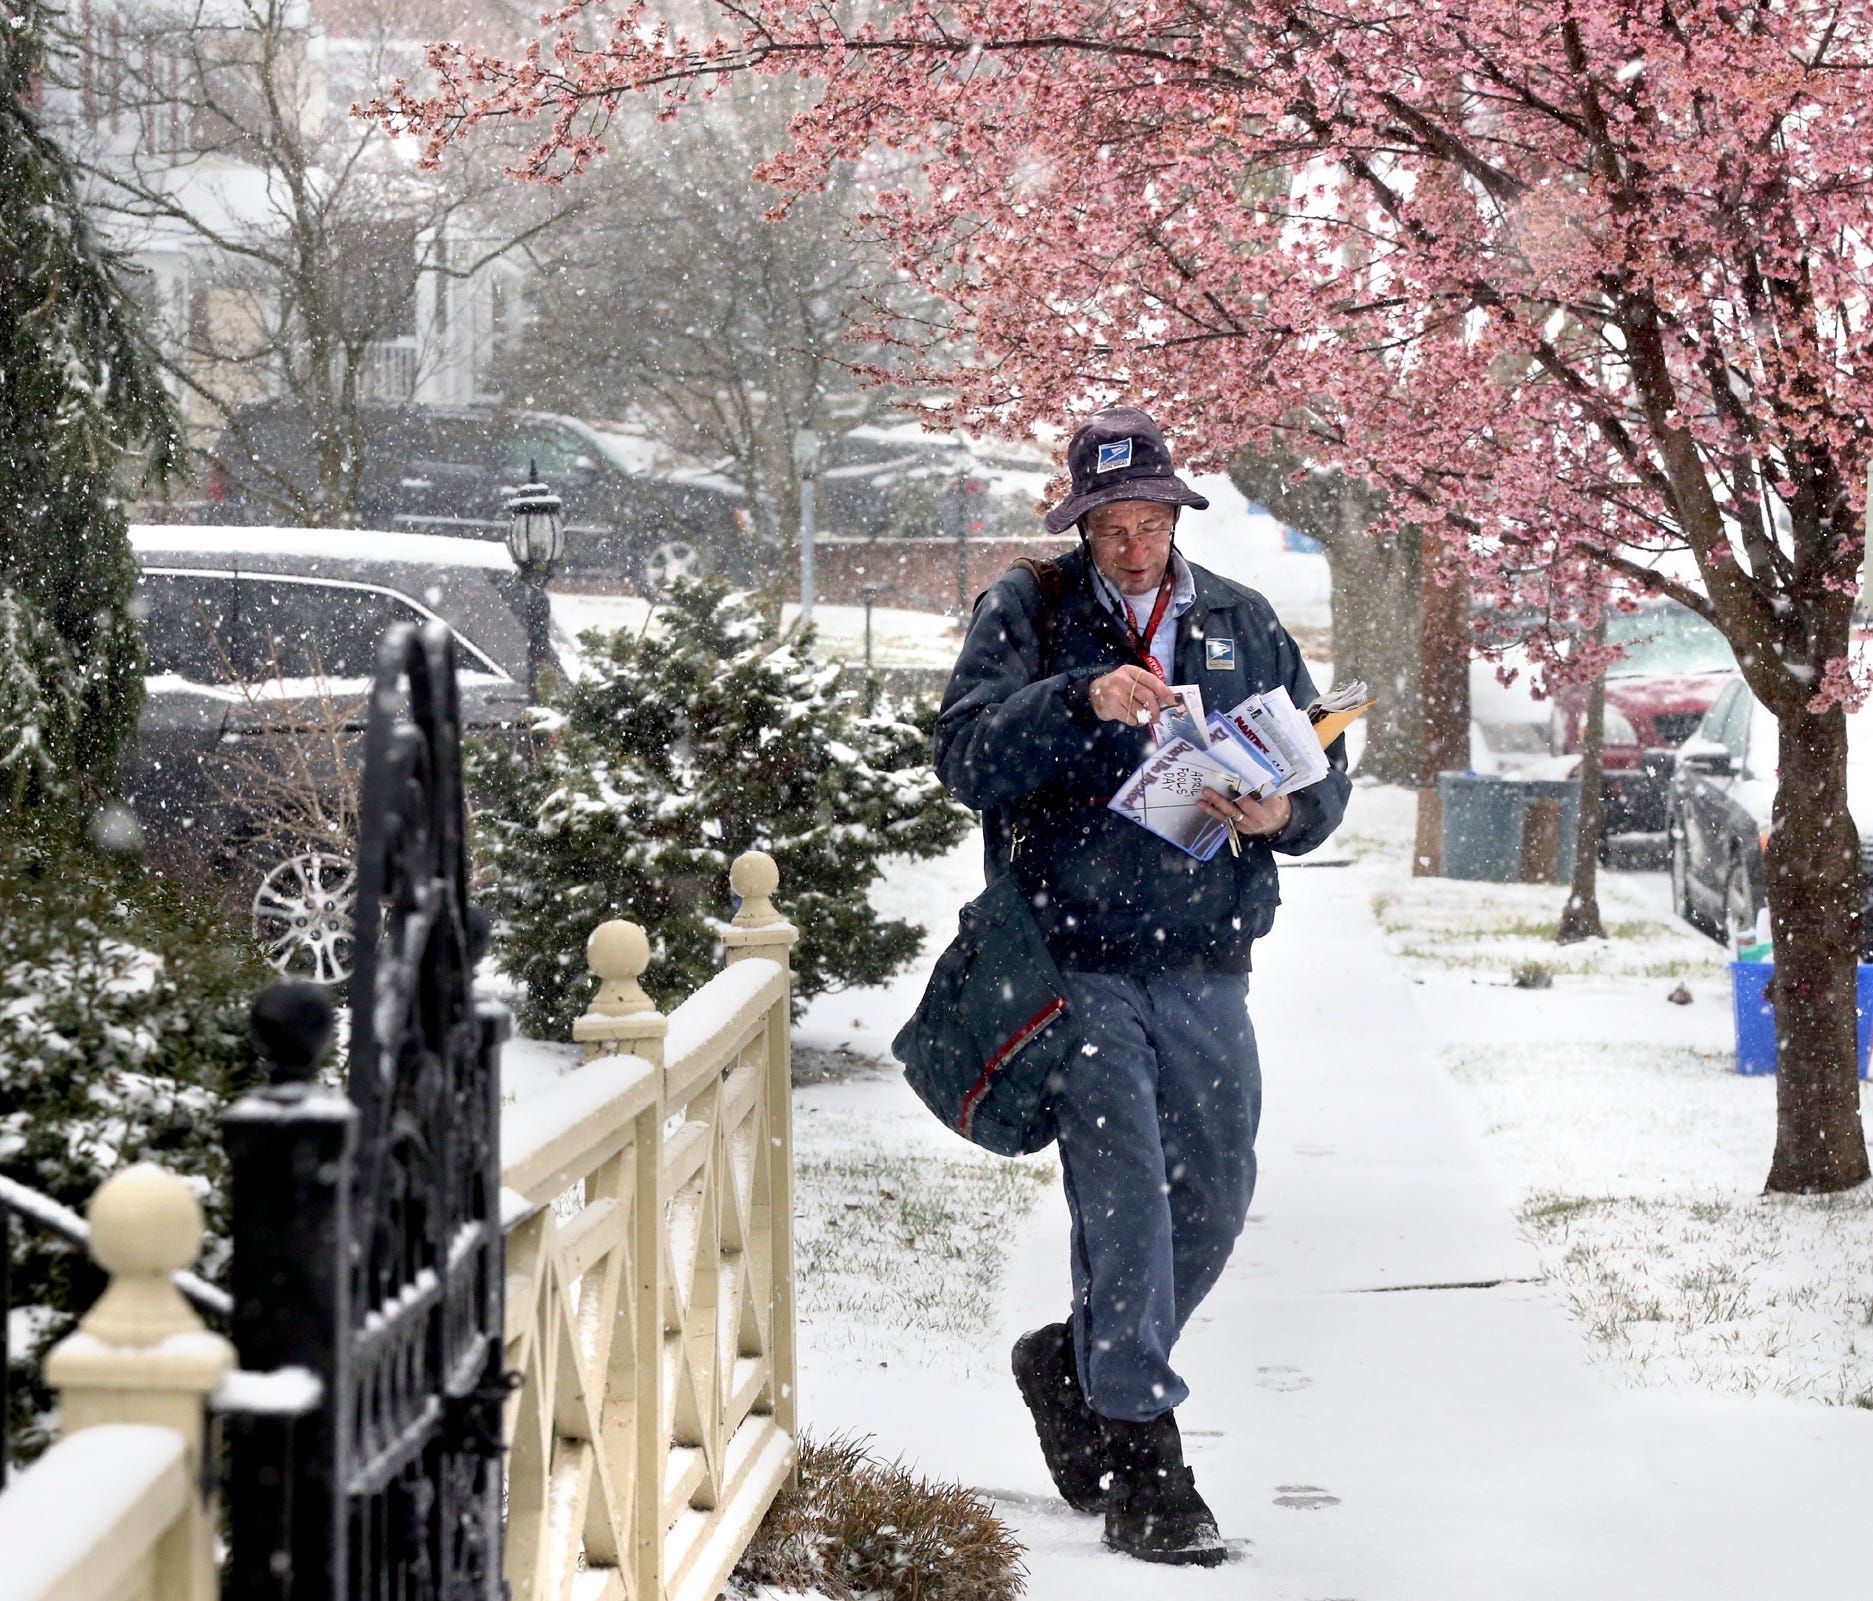 With cherry trees blooming in the background, U.S. Postal Service letter carrier Dugan Hahn delivers the mail on the first day of spring, Tuesday, March 20, 2018, in Winchester, Va.